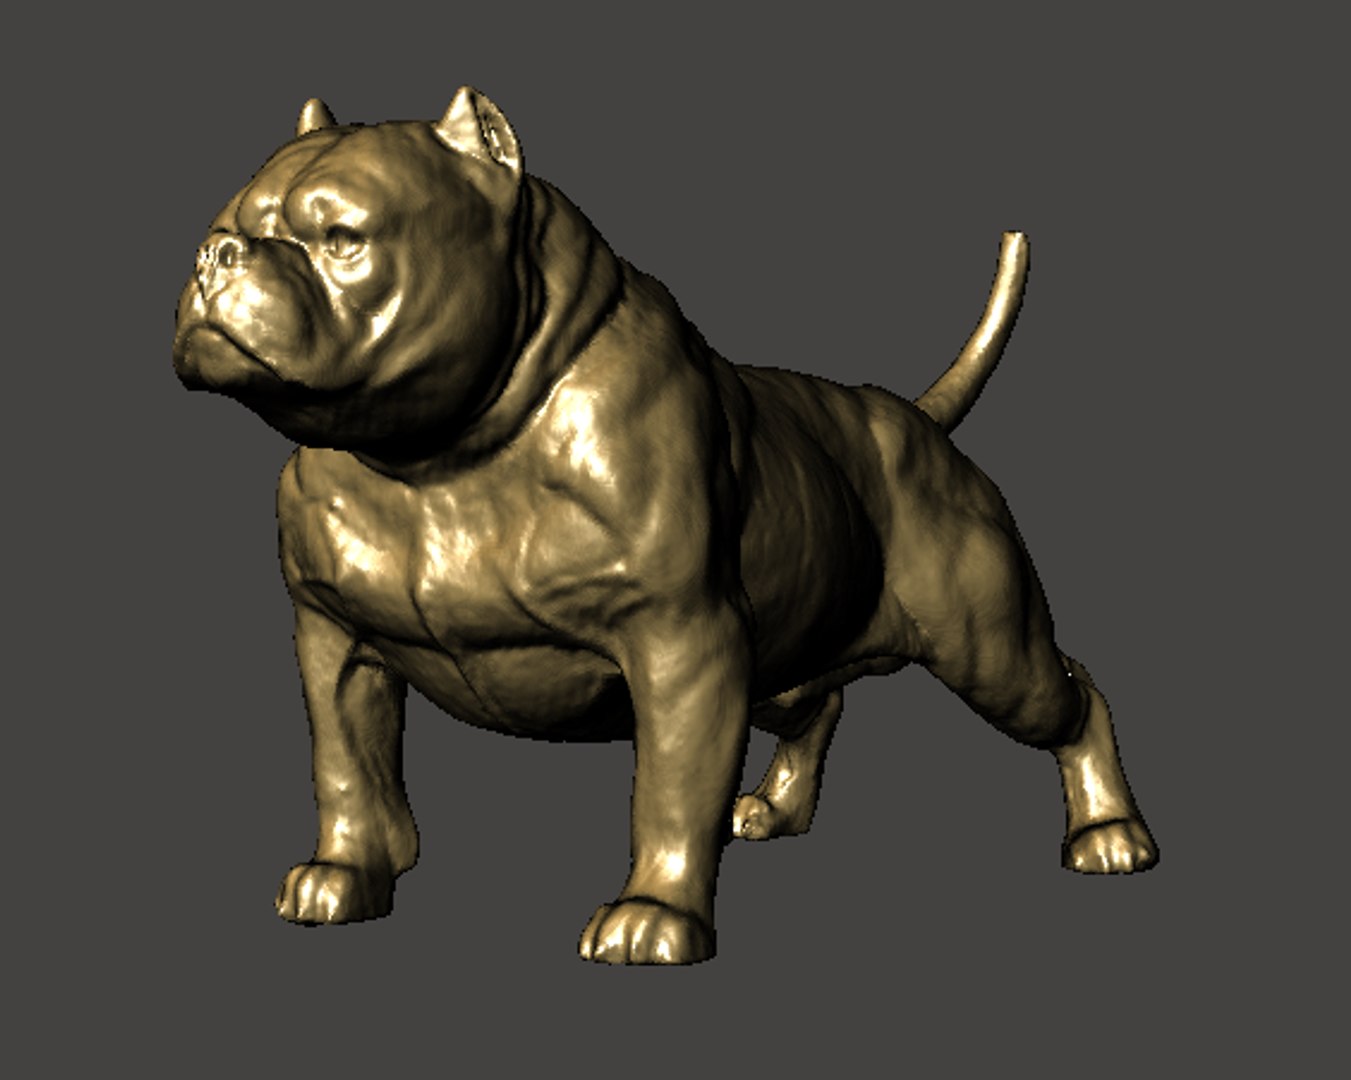 3,048 Small American Bully Dog Images, Stock Photos, 3D objects, & Vectors